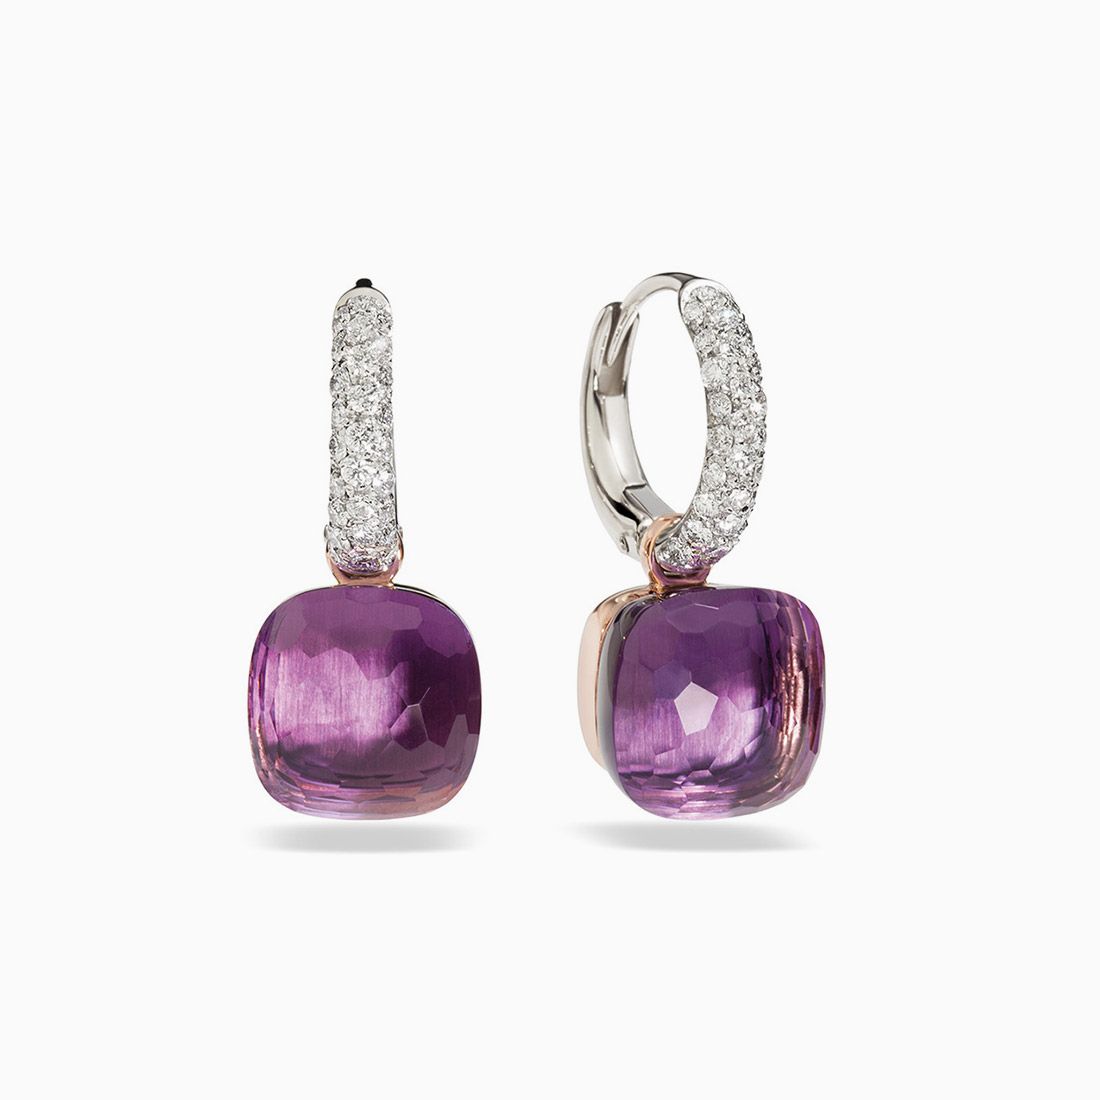 Pomellato Earrings with Amethysts and Diamonds 